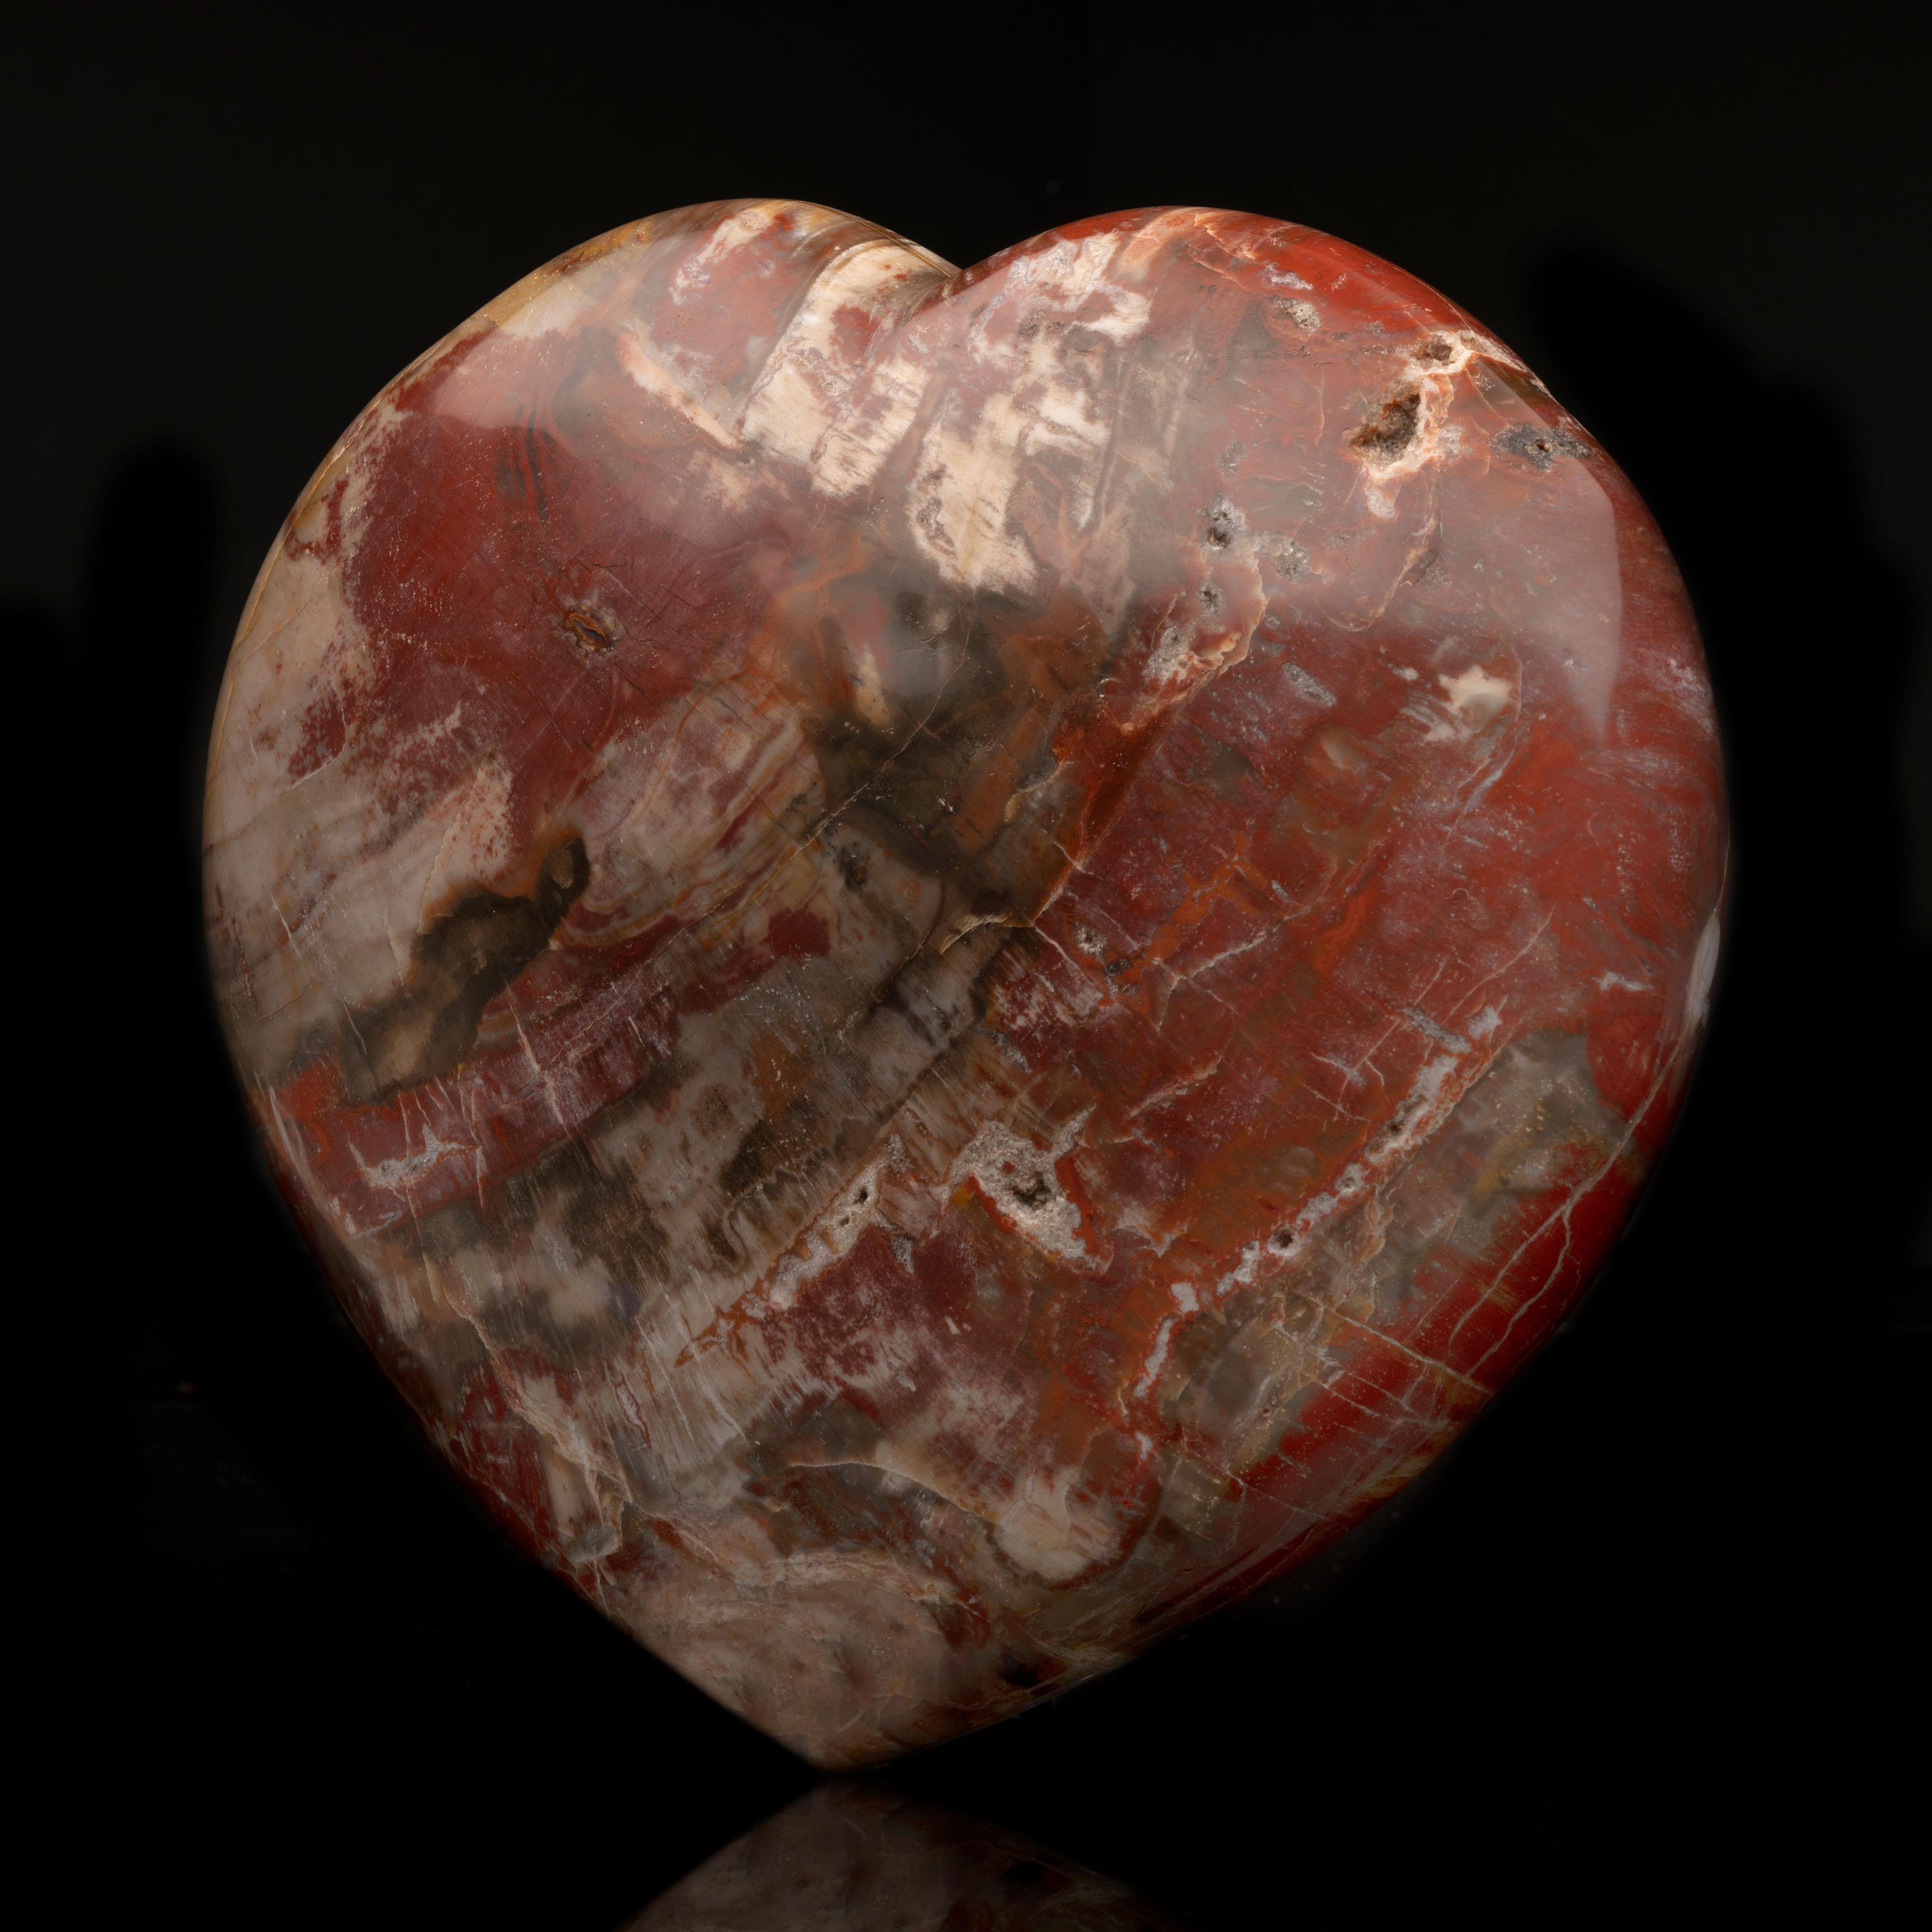 Malagasy Genuine 220 Million Year Old Petrified Wood Heart from Madagascar // 9 Lb For Sale